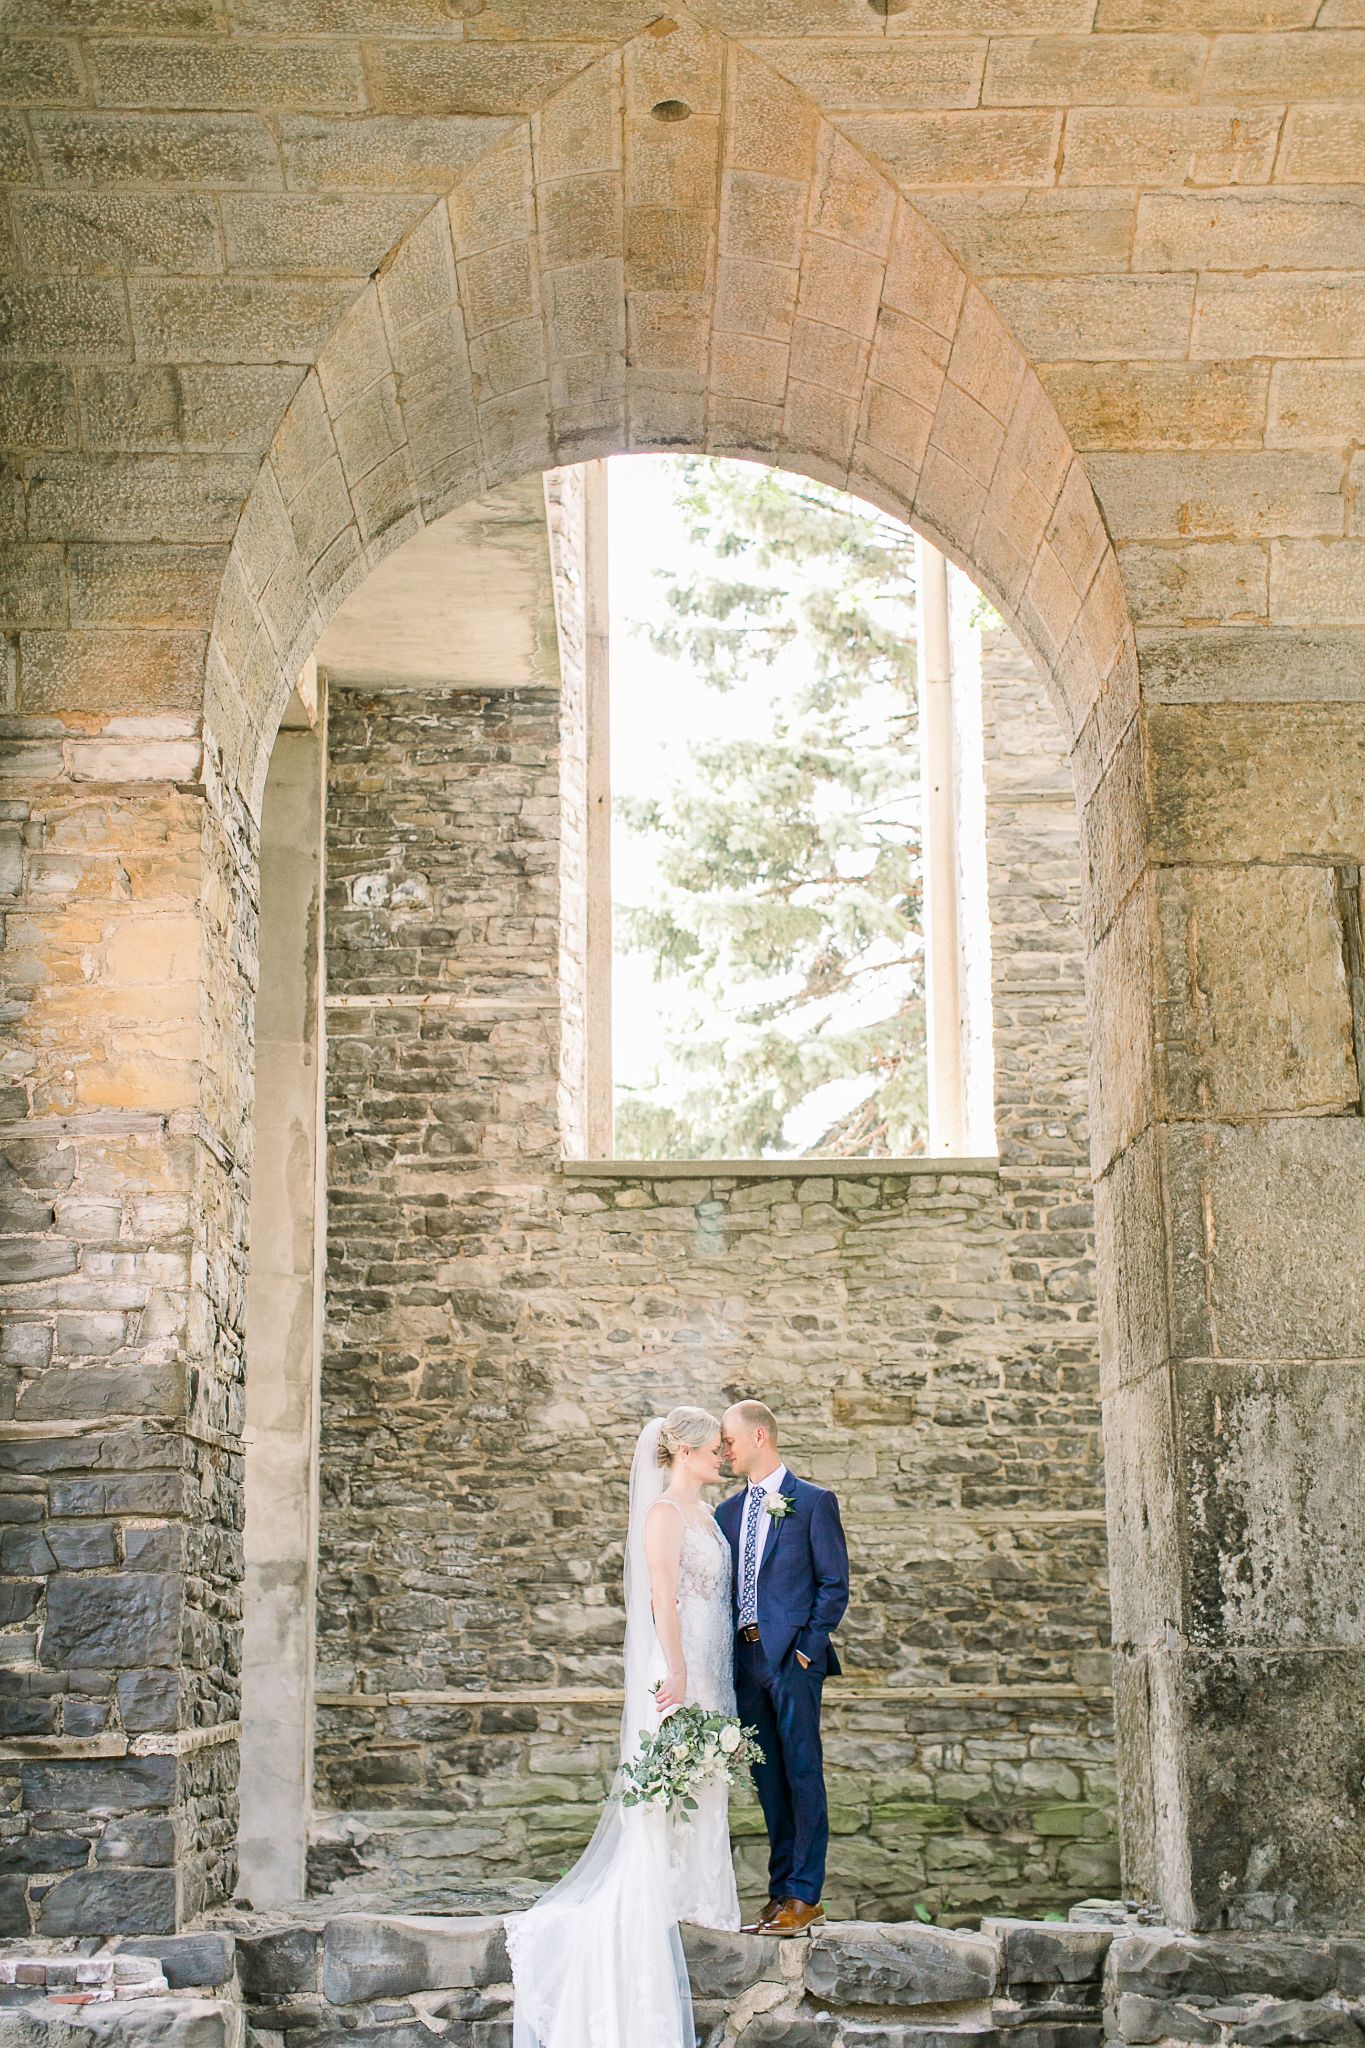 Bride and groom standing in an old stone church